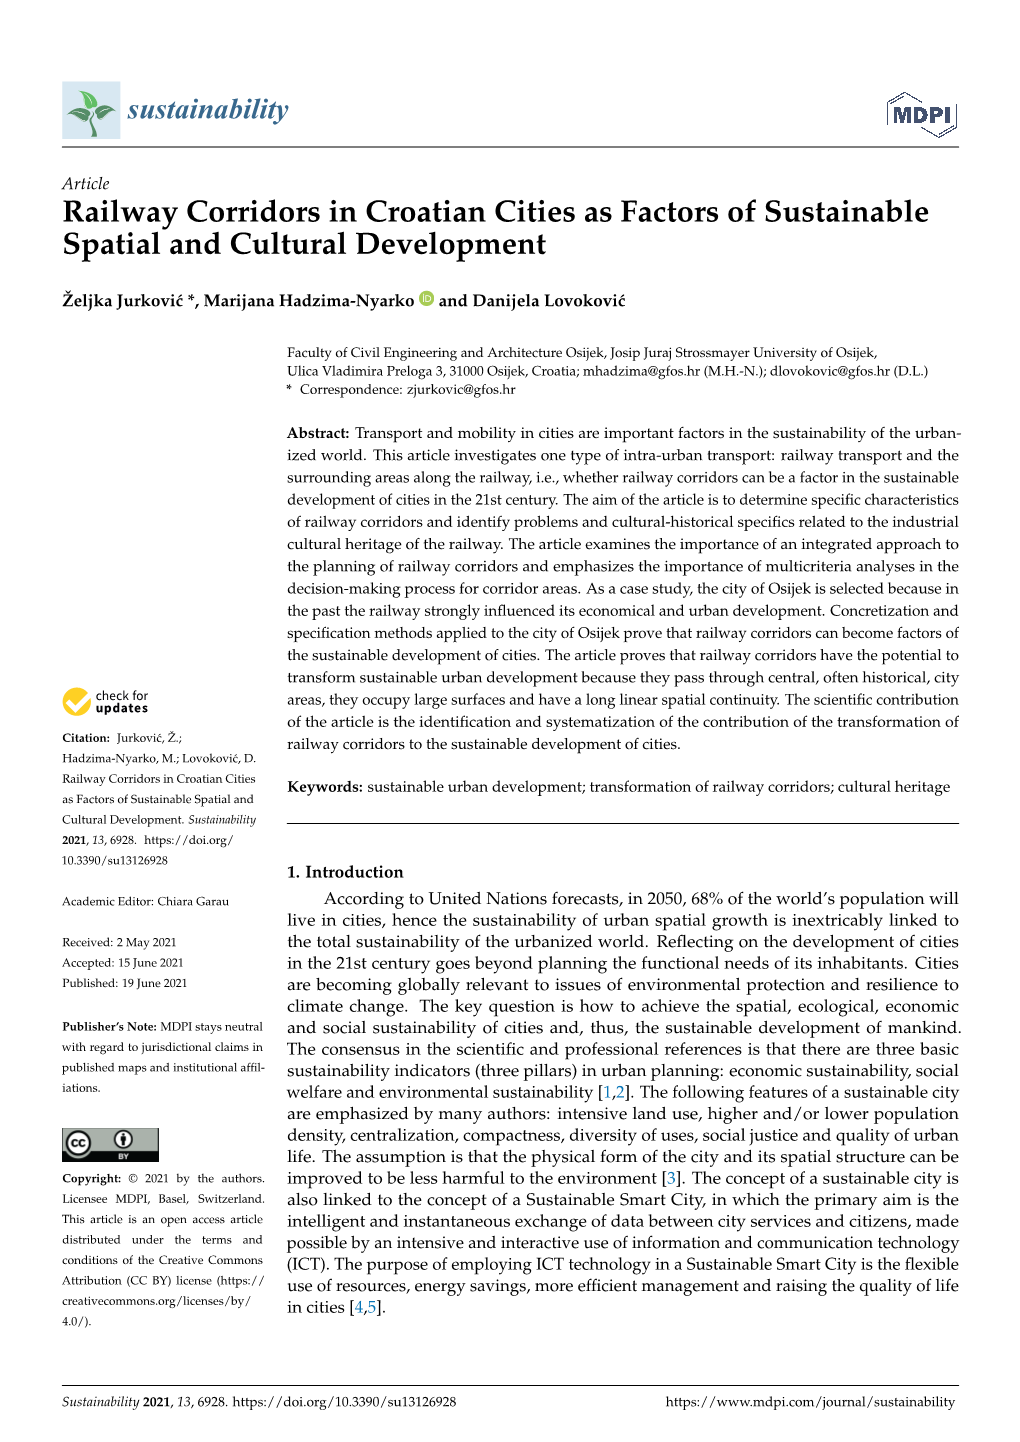 Railway Corridors in Croatian Cities As Factors of Sustainable Spatial and Cultural Development